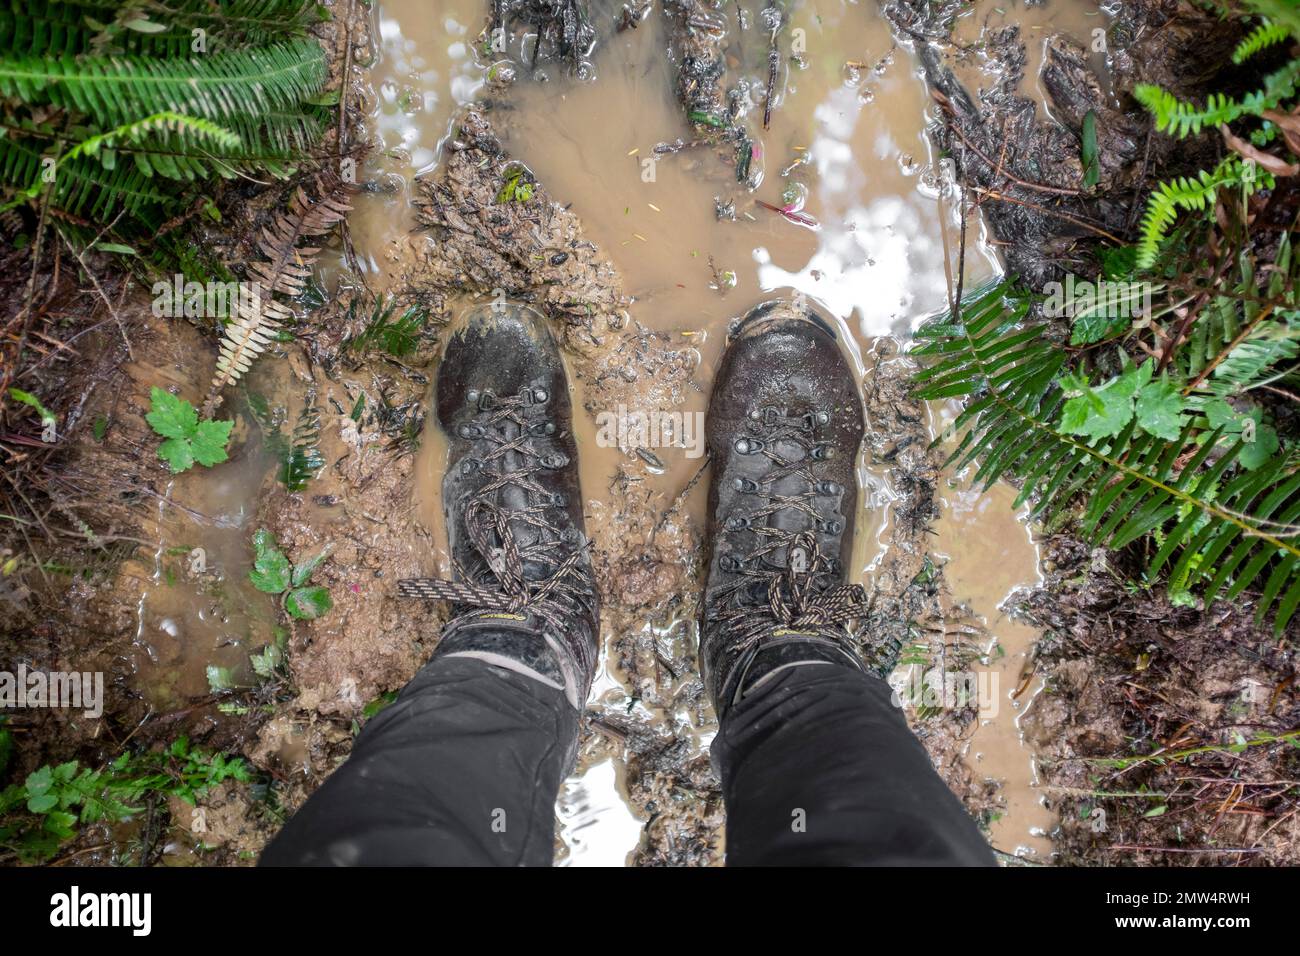 WA20814-00....WASHINGTON - The muddy trail between Oil City Beach and Mosquito Beach in Olympic National Park. Stock Photo